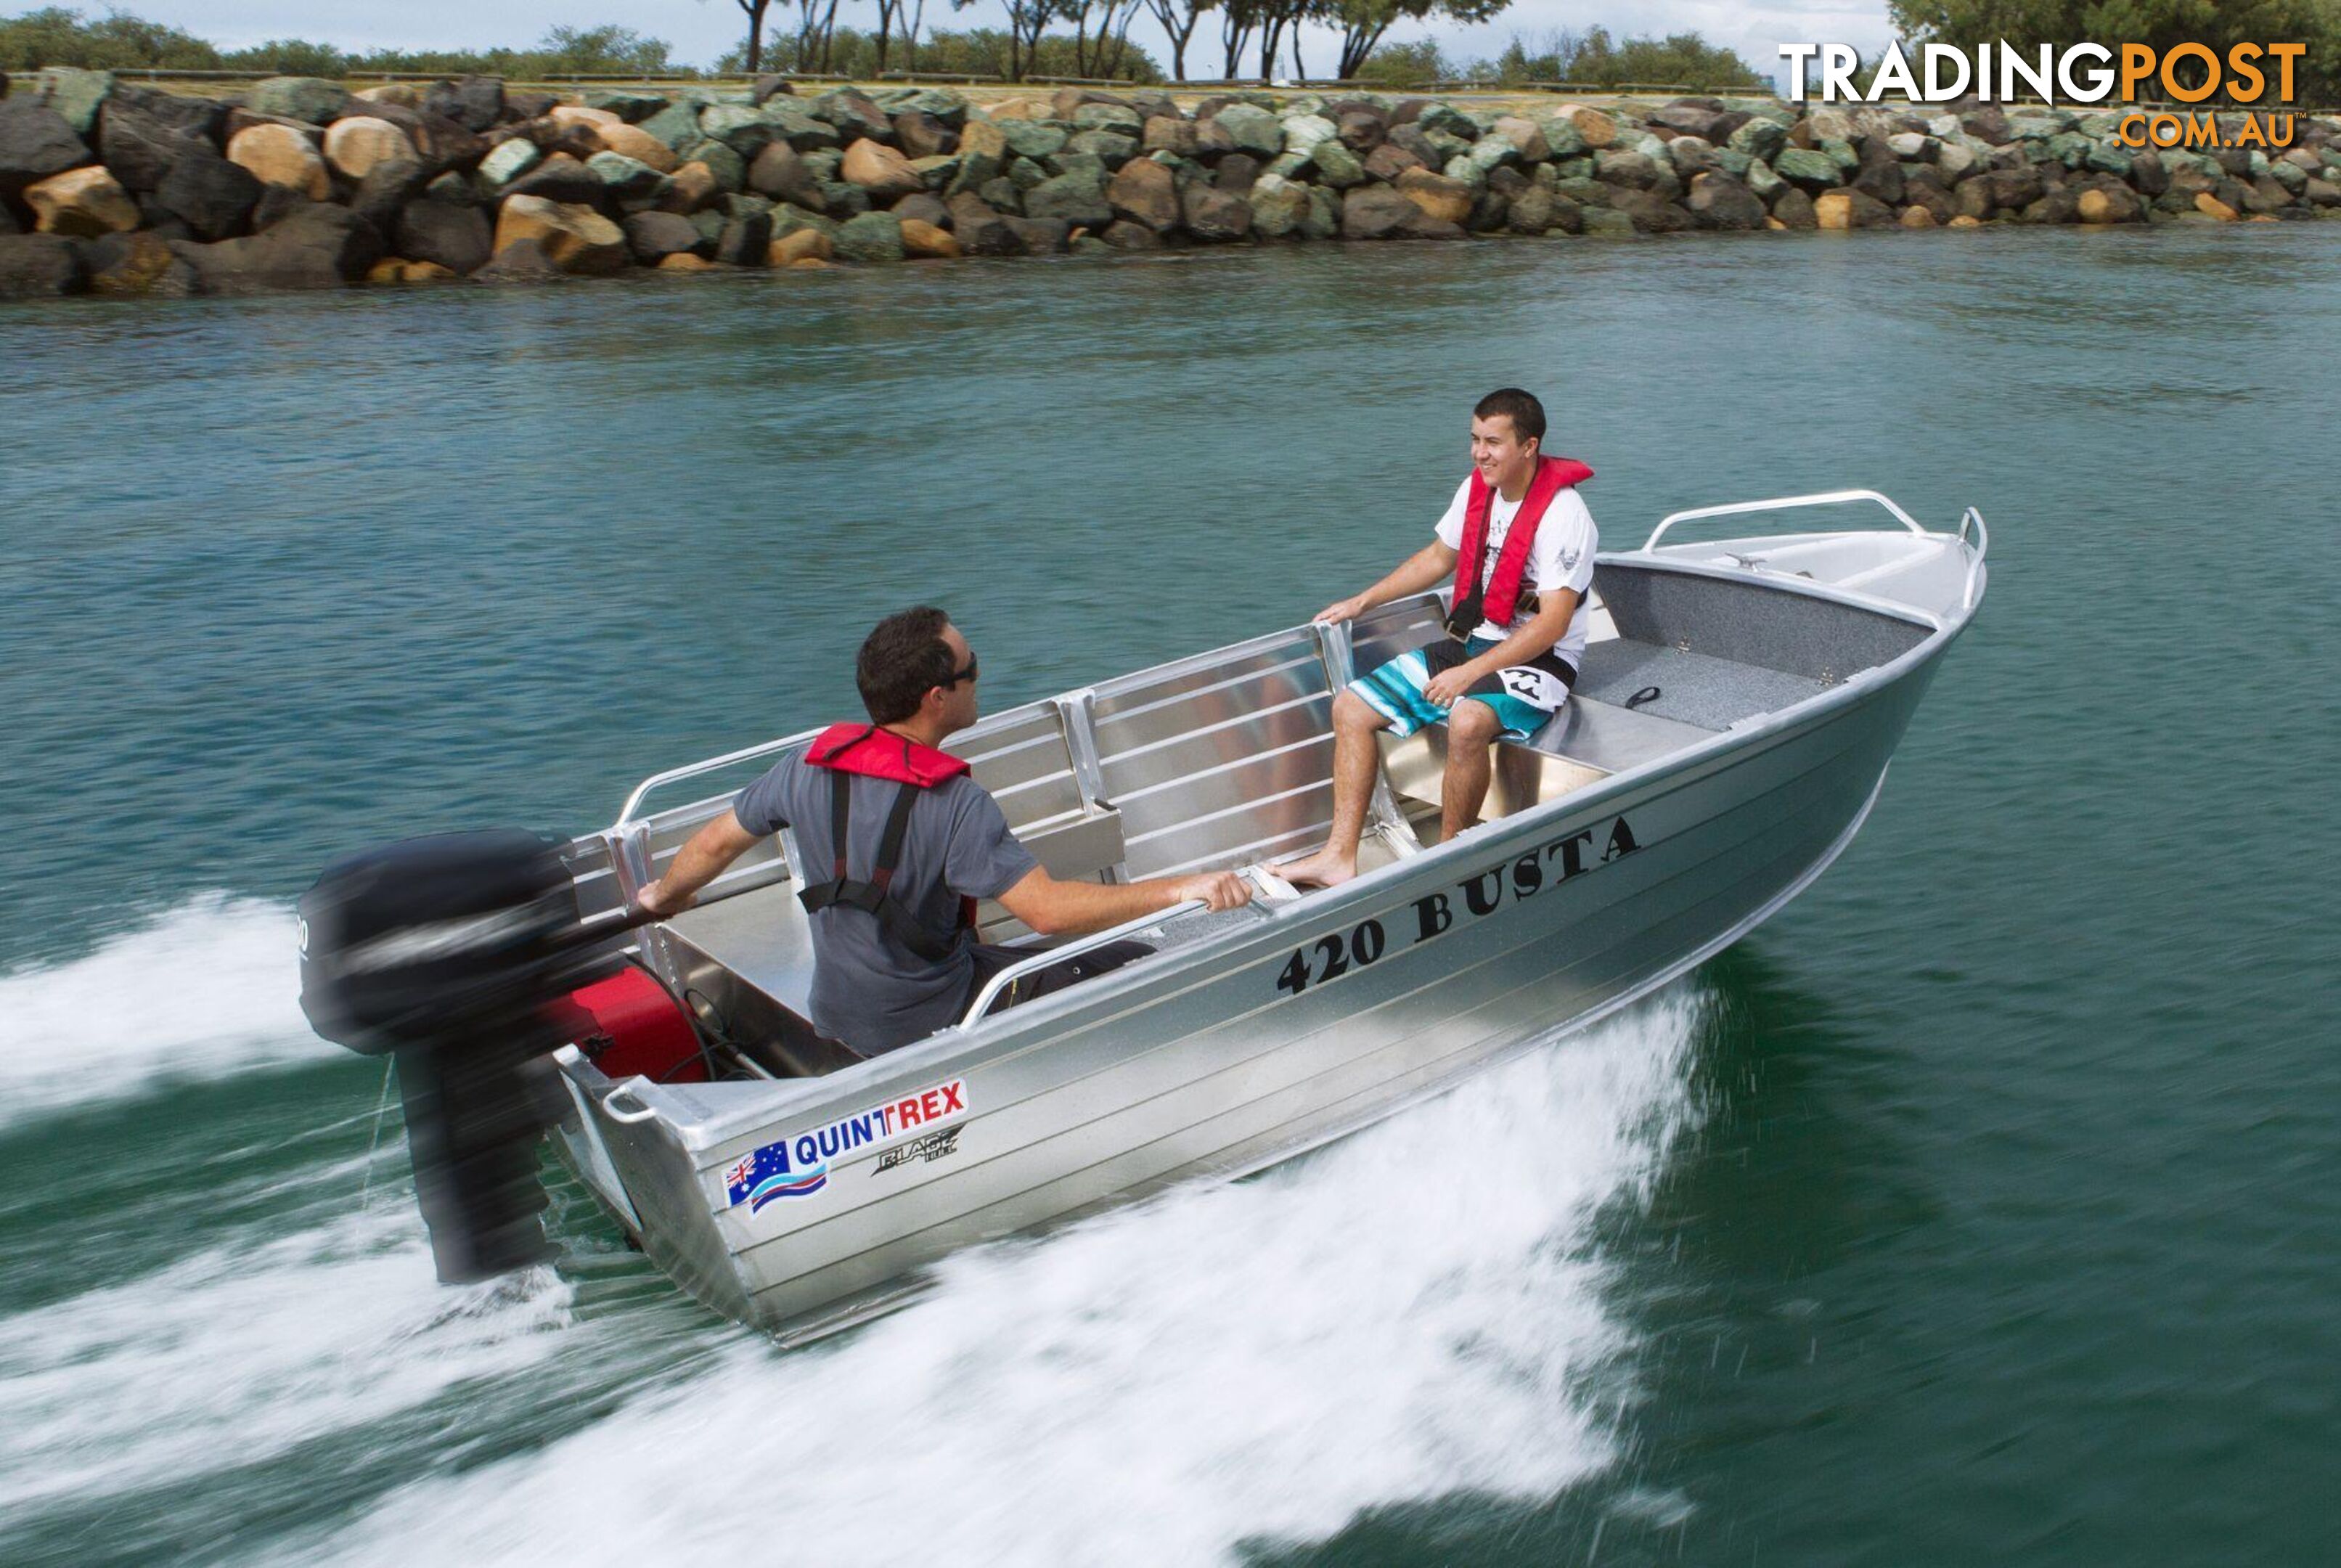 QUINTREX 420 BUSTA WITH YAMAHA 40HP FOURSTROKE FOR SALE